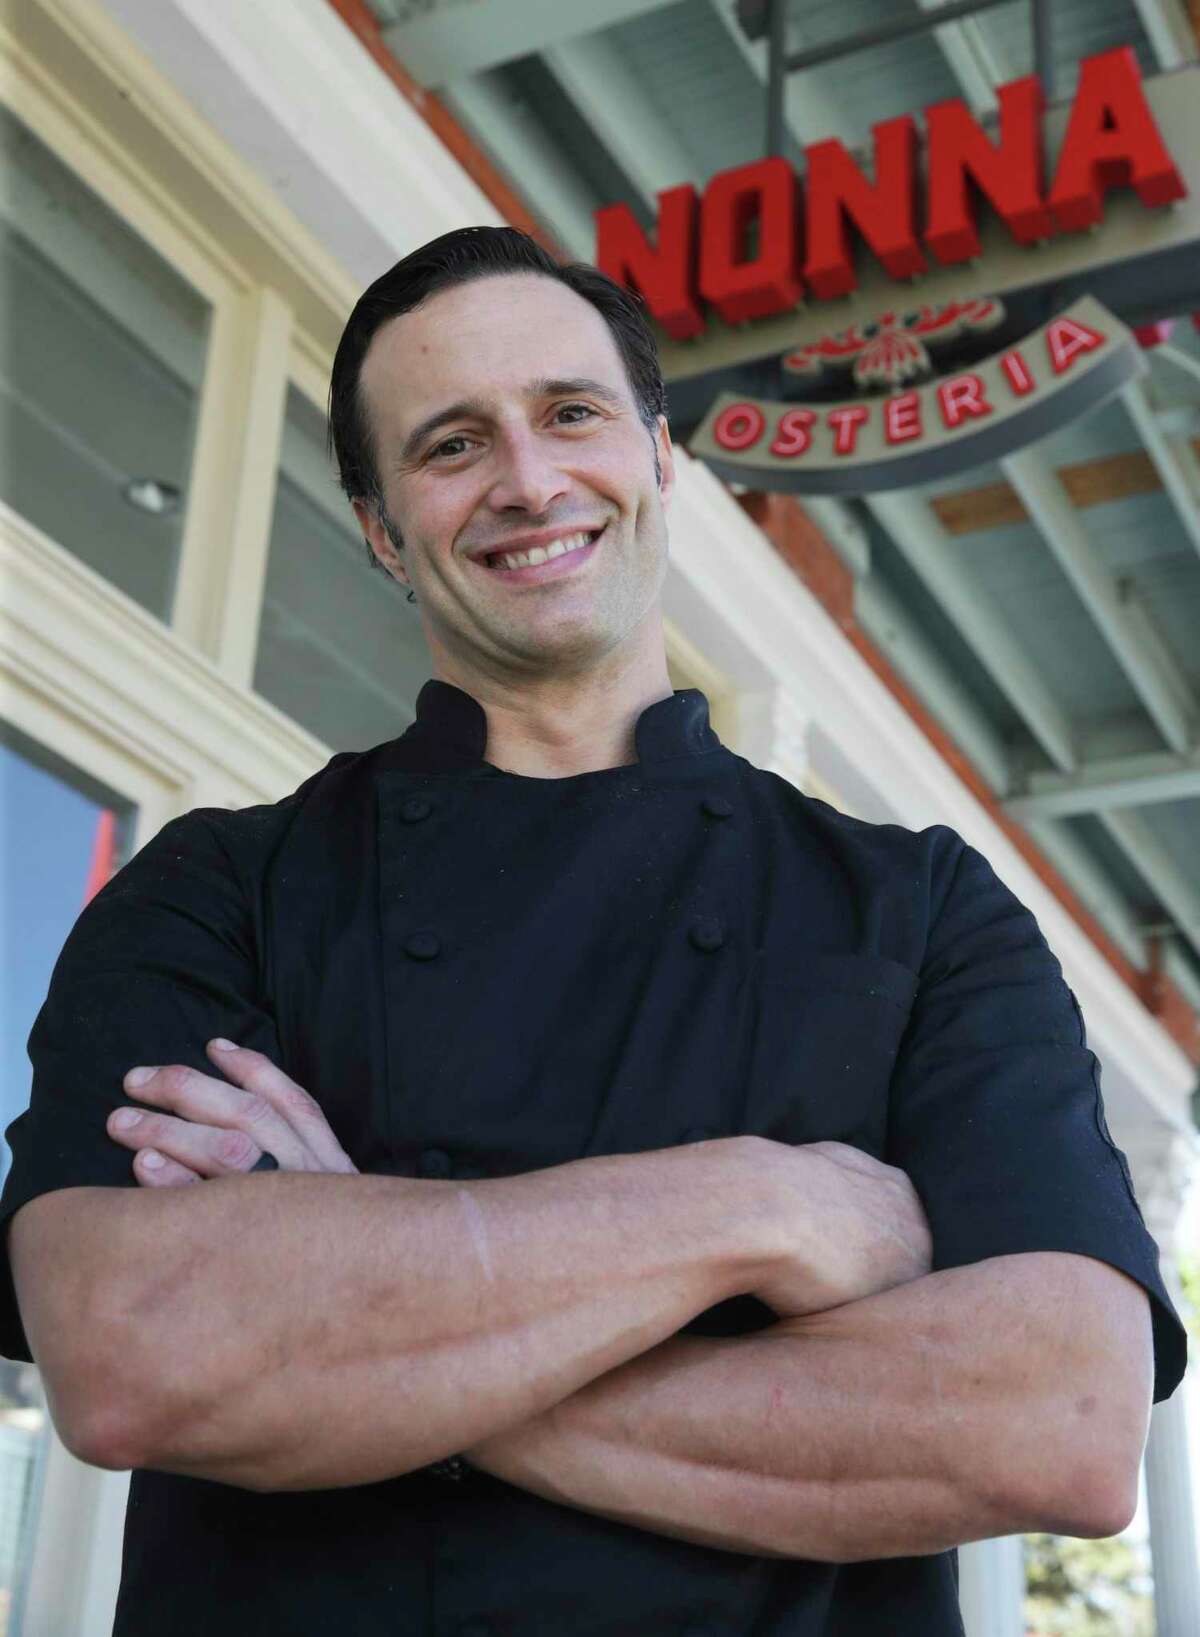 Chef Luca Della Casa will lead the new North Side project from the team behind Nonna Osteria.